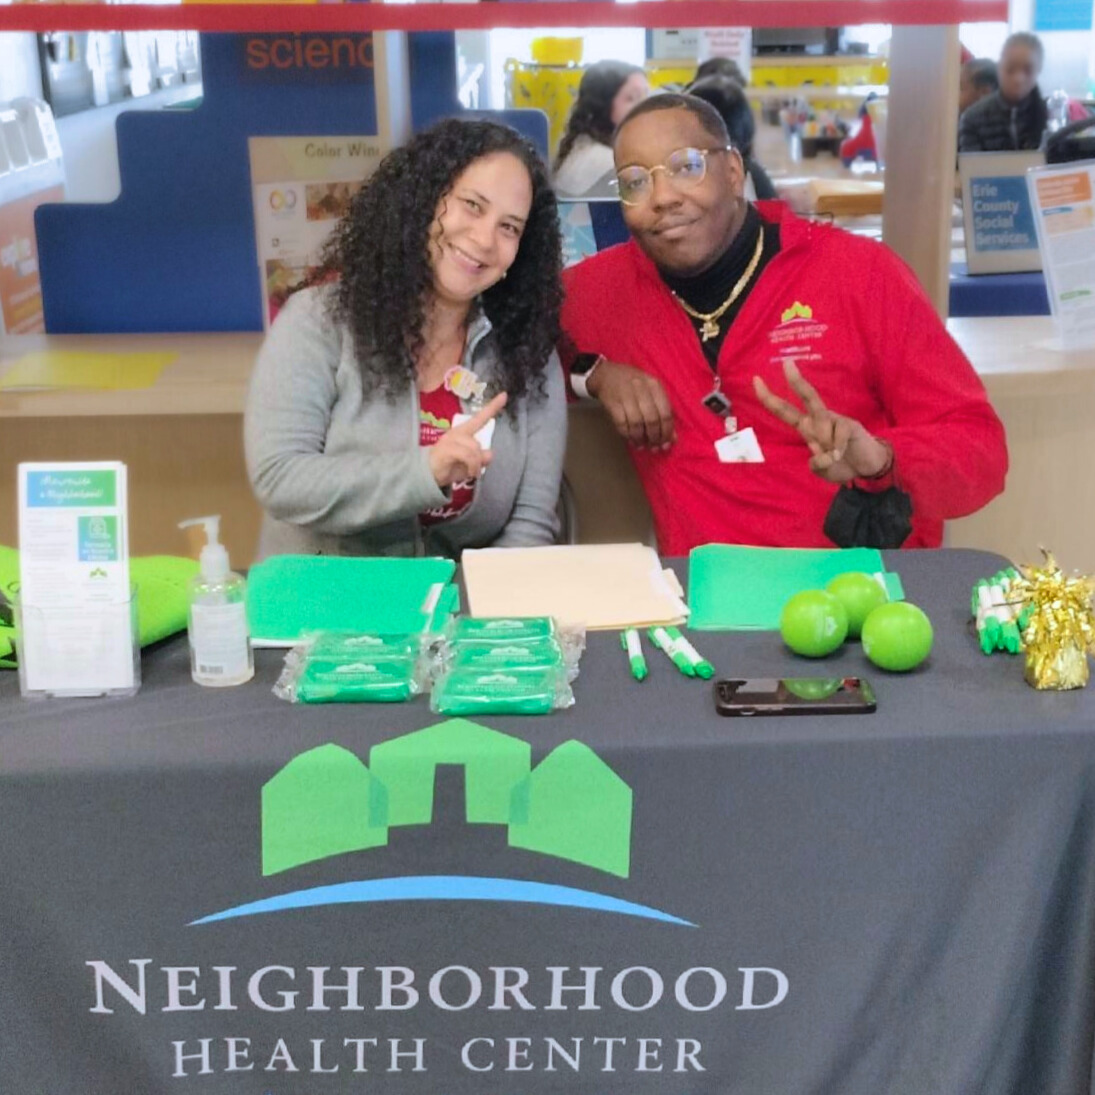 We are part of the community! Our ambassadors enjoyed meeting you at the @ECDOH ‘Spring into CYSHCN” family resource fair on Friday. We are welcoming new patients at Neighborhood. #WelcometoNeighborhood #community